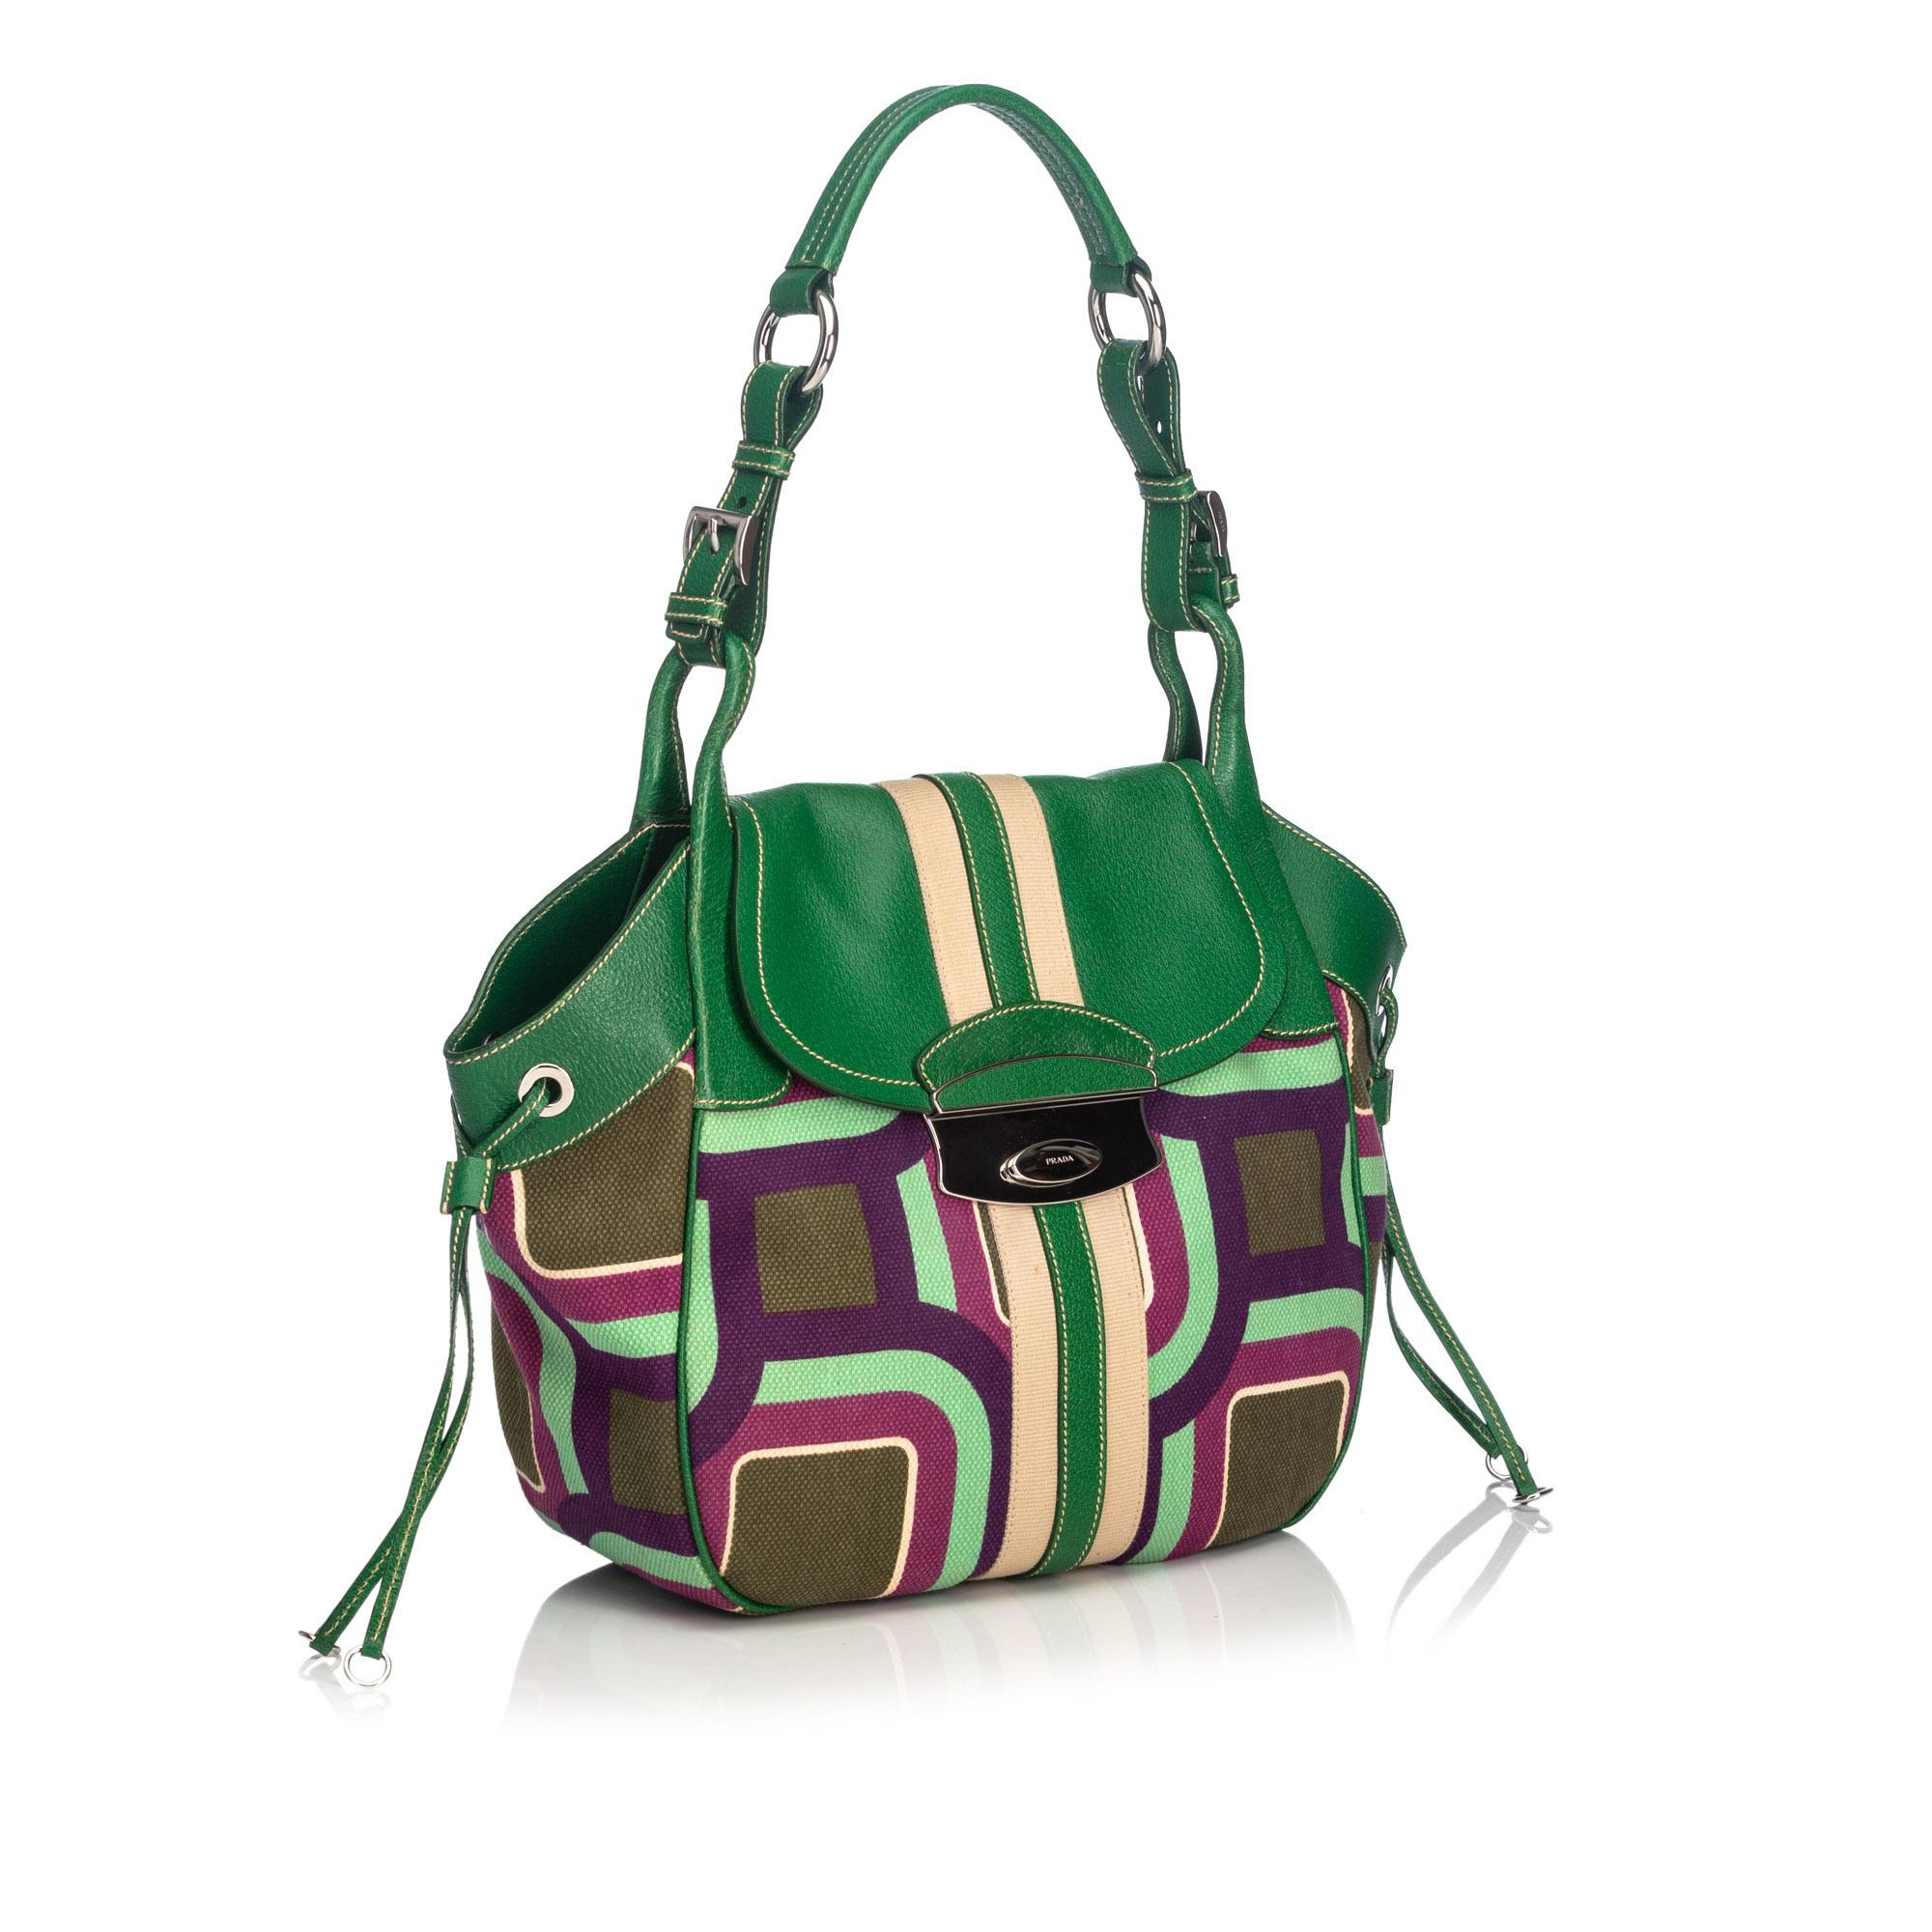 This shoulder bag features a printed canvas body with leather trim, a flat leather strap, a top flap, an open top with a magnetic closure, and an interior zip pocket. It carries as B+ condition rating.

Inclusions: 
Authenticity